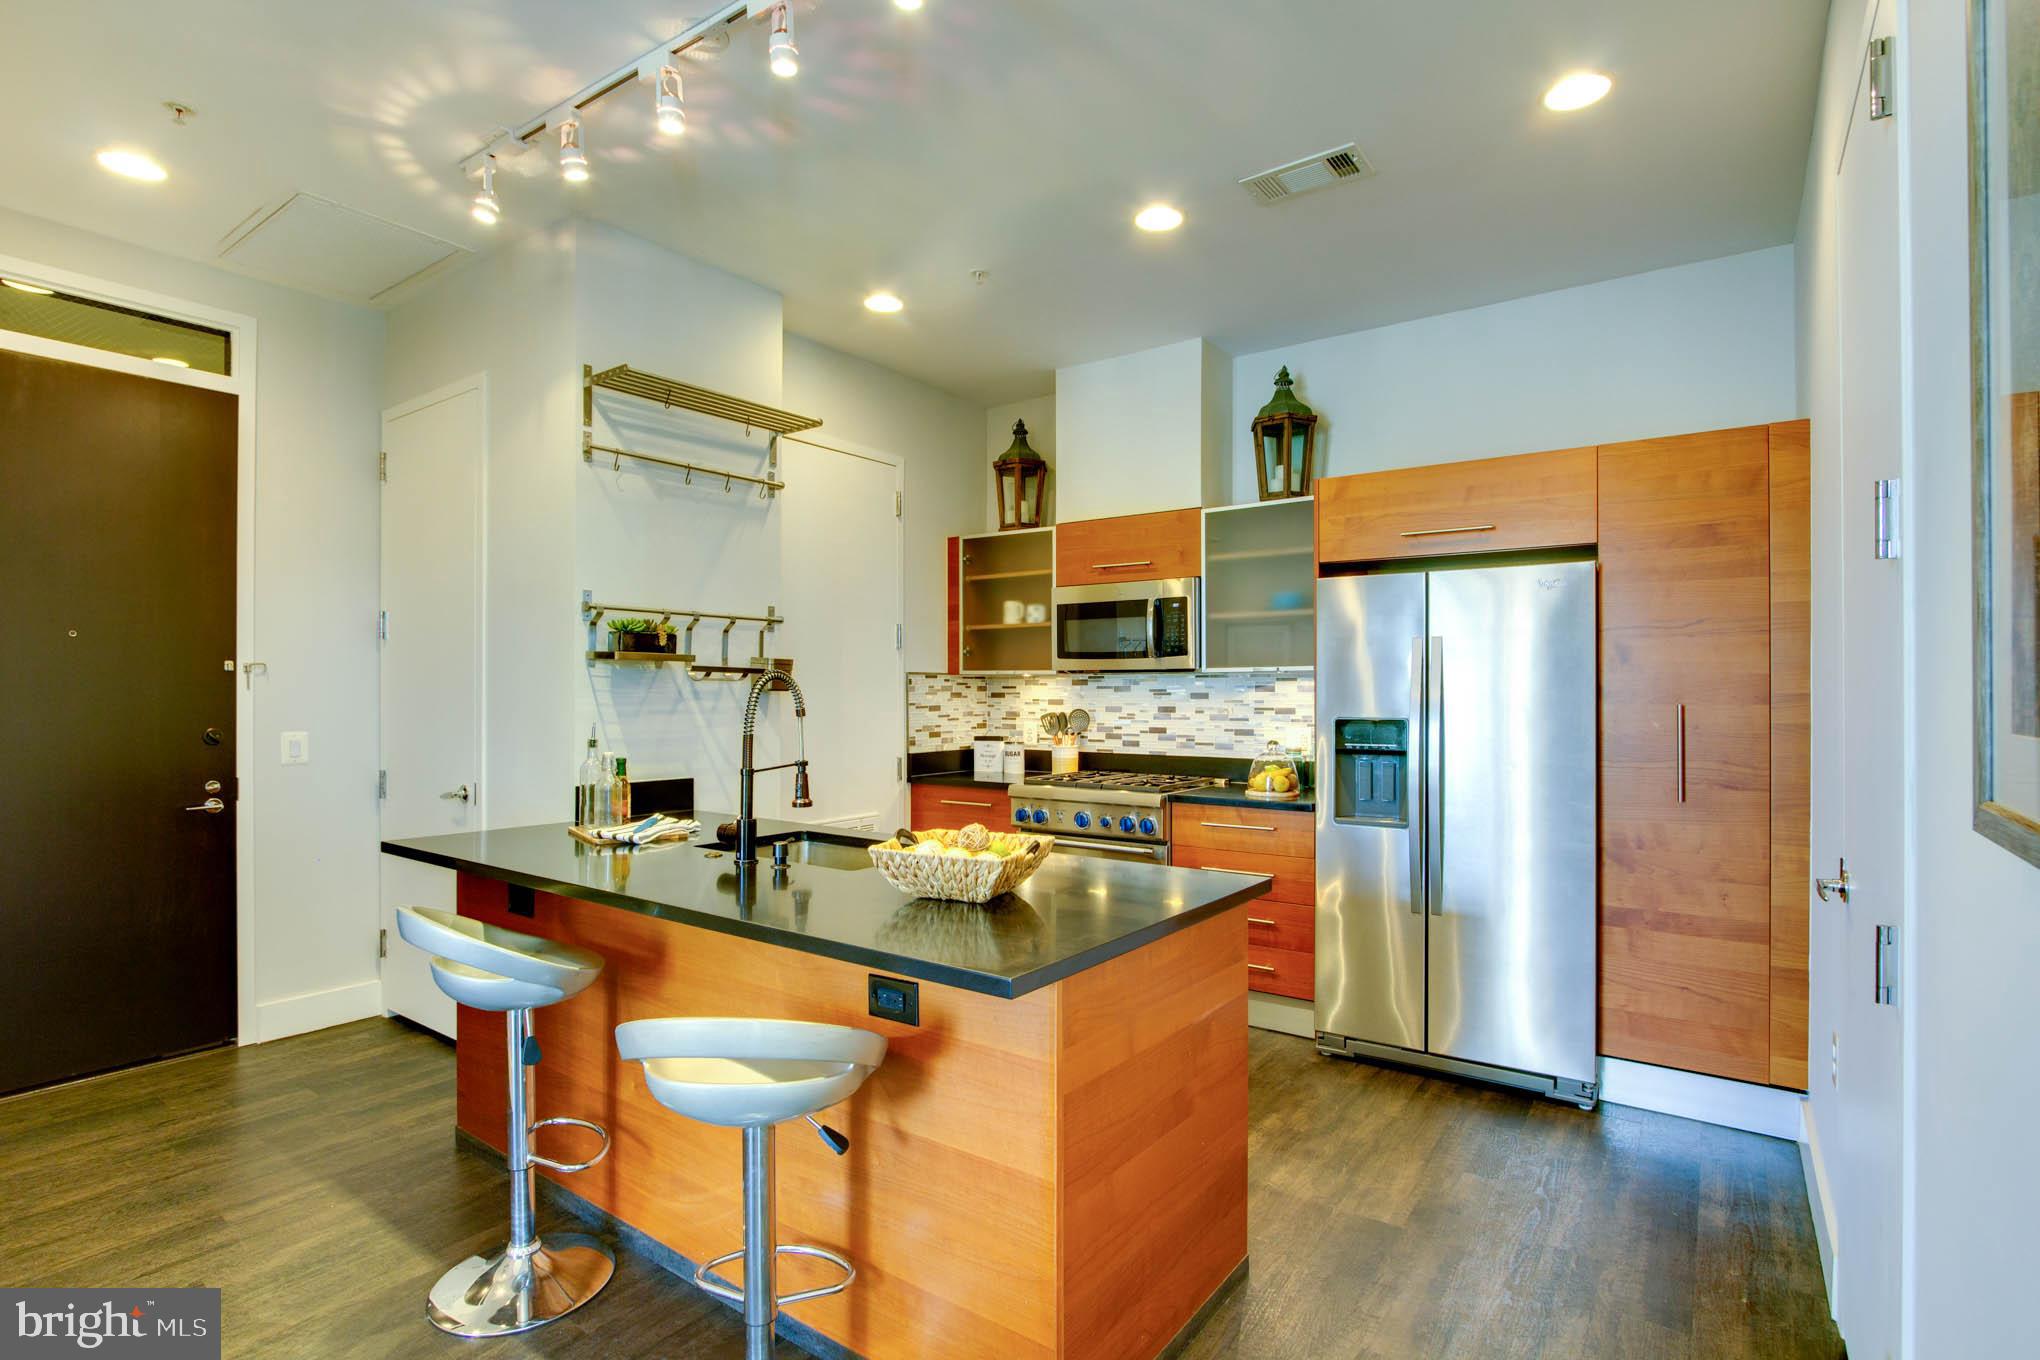 a kitchen with stainless steel appliances granite countertop a refrigerator a stove top oven and a refrigerator